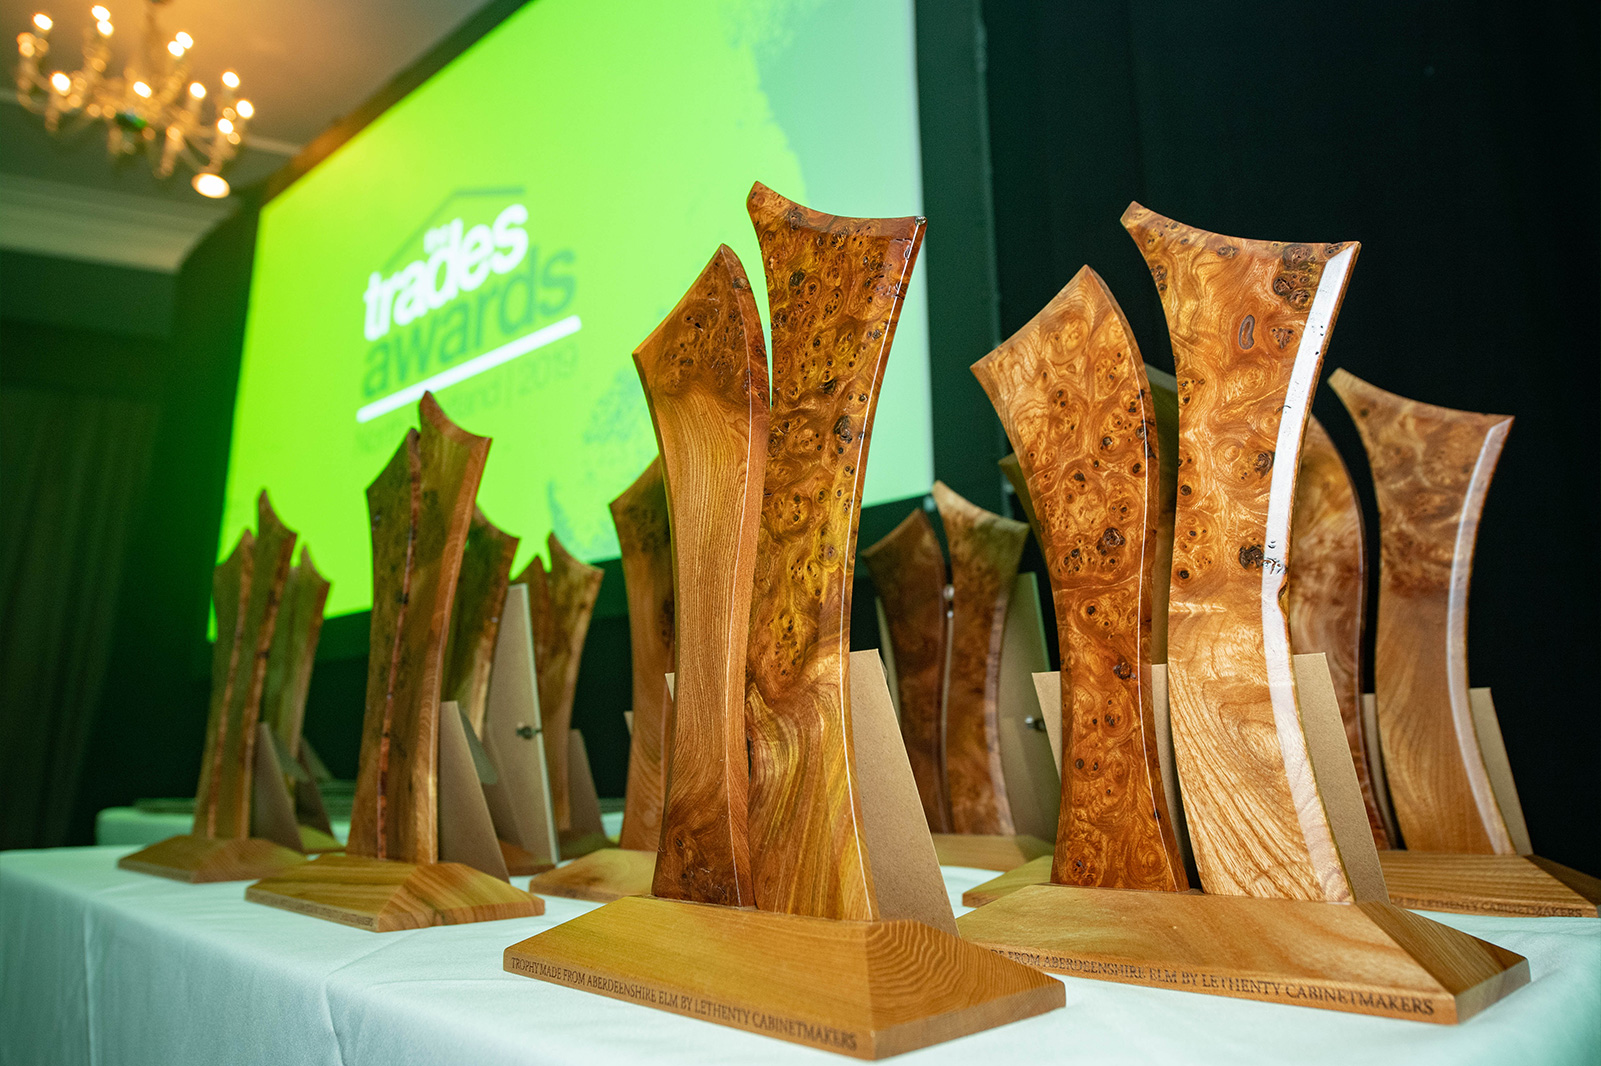 How can taking part in Trades Awards 2023 help your business?